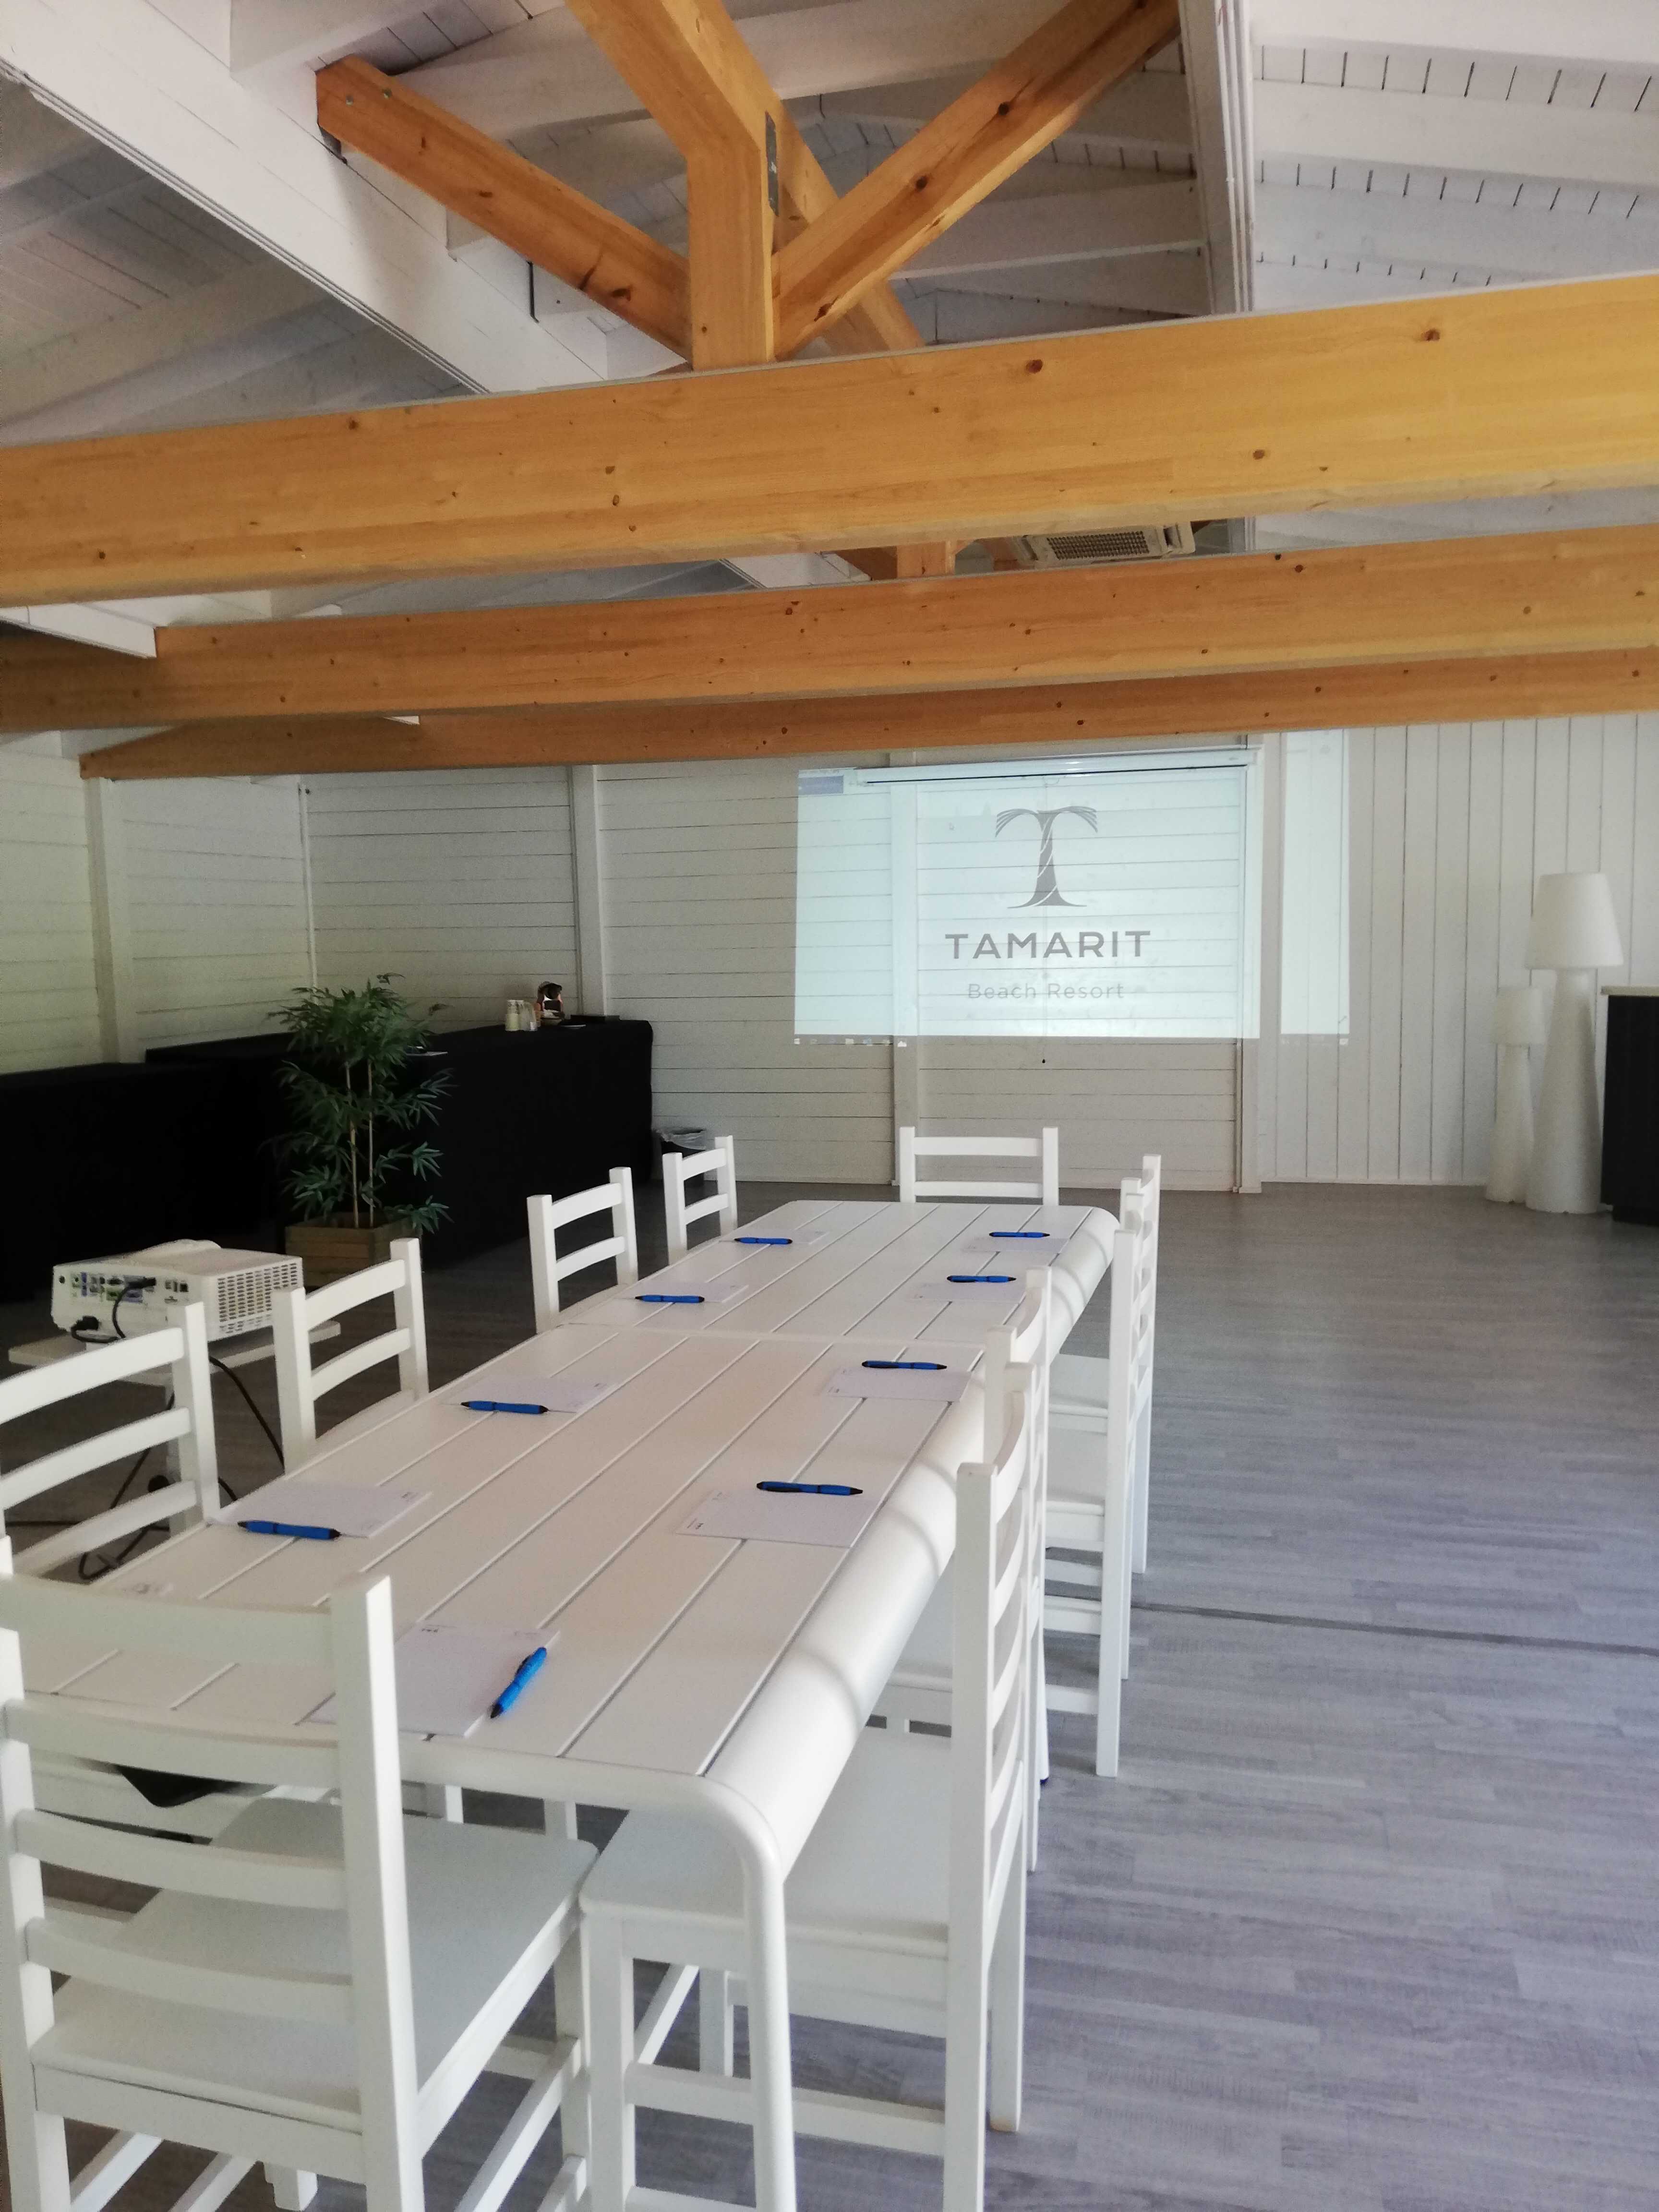 Tamarit Beach Resort at the forefront of professional training